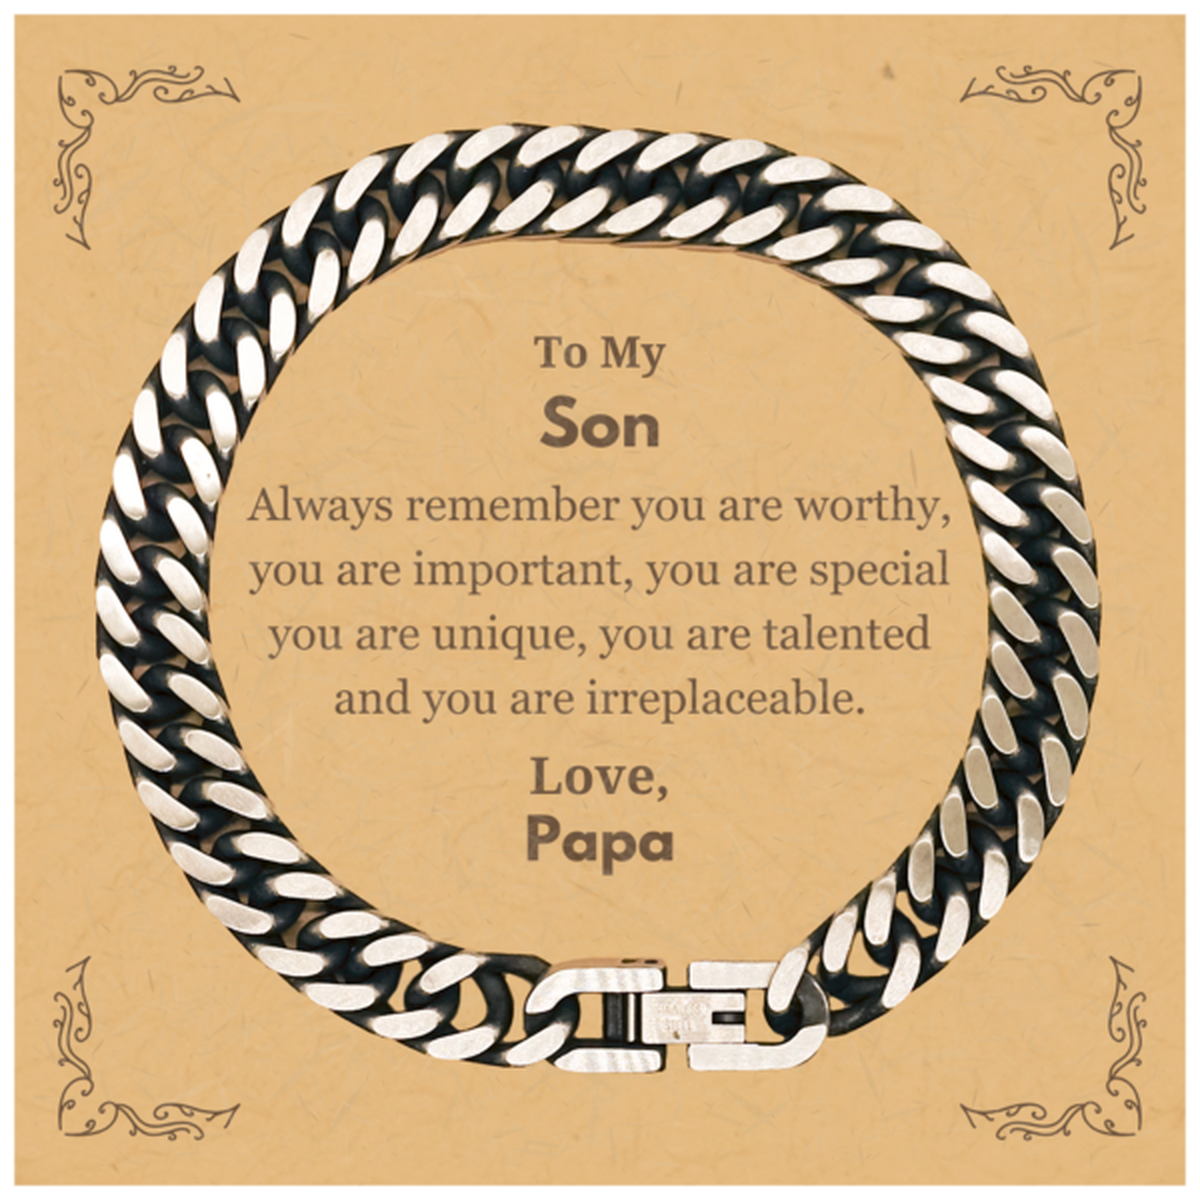 Son Birthday Gifts from Papa, Inspirational Cuban Link Chain Bracelet for Son Christmas Graduation Gifts for Son Always remember you are worthy, you are important. Love, Papa